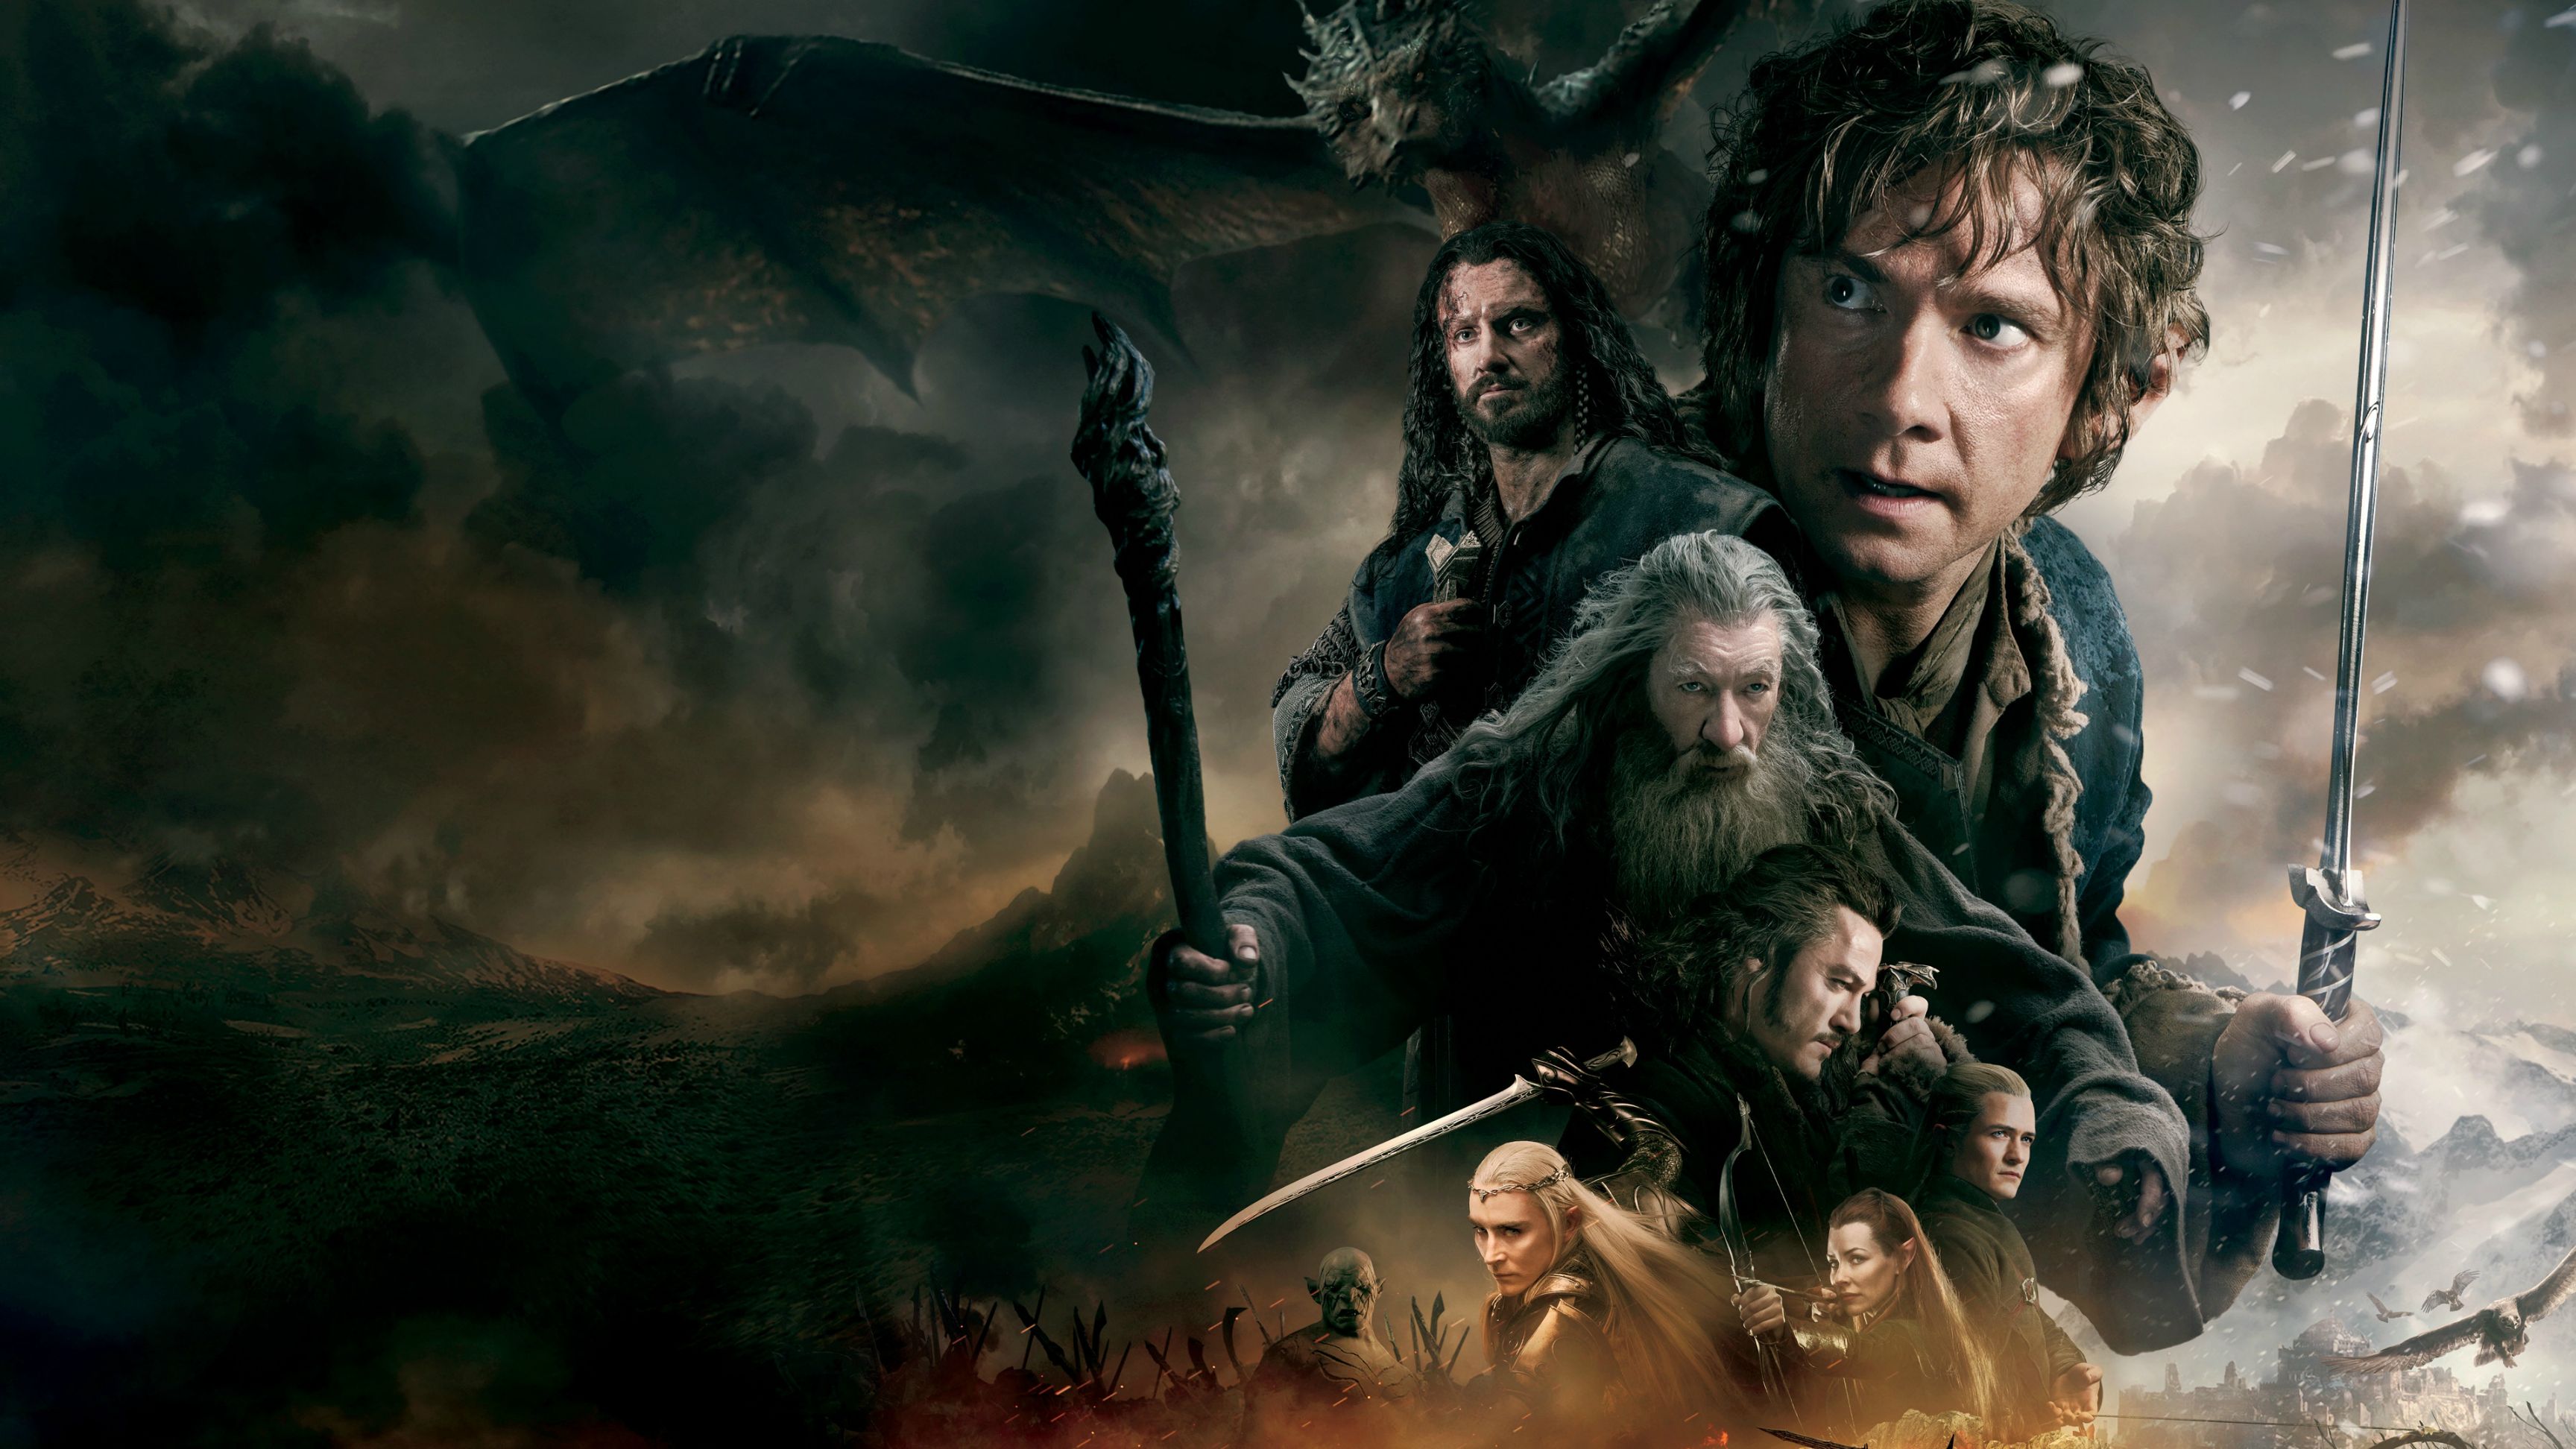 Download The Hobbit wallpapers for mobile phone free The Hobbit HD  pictures